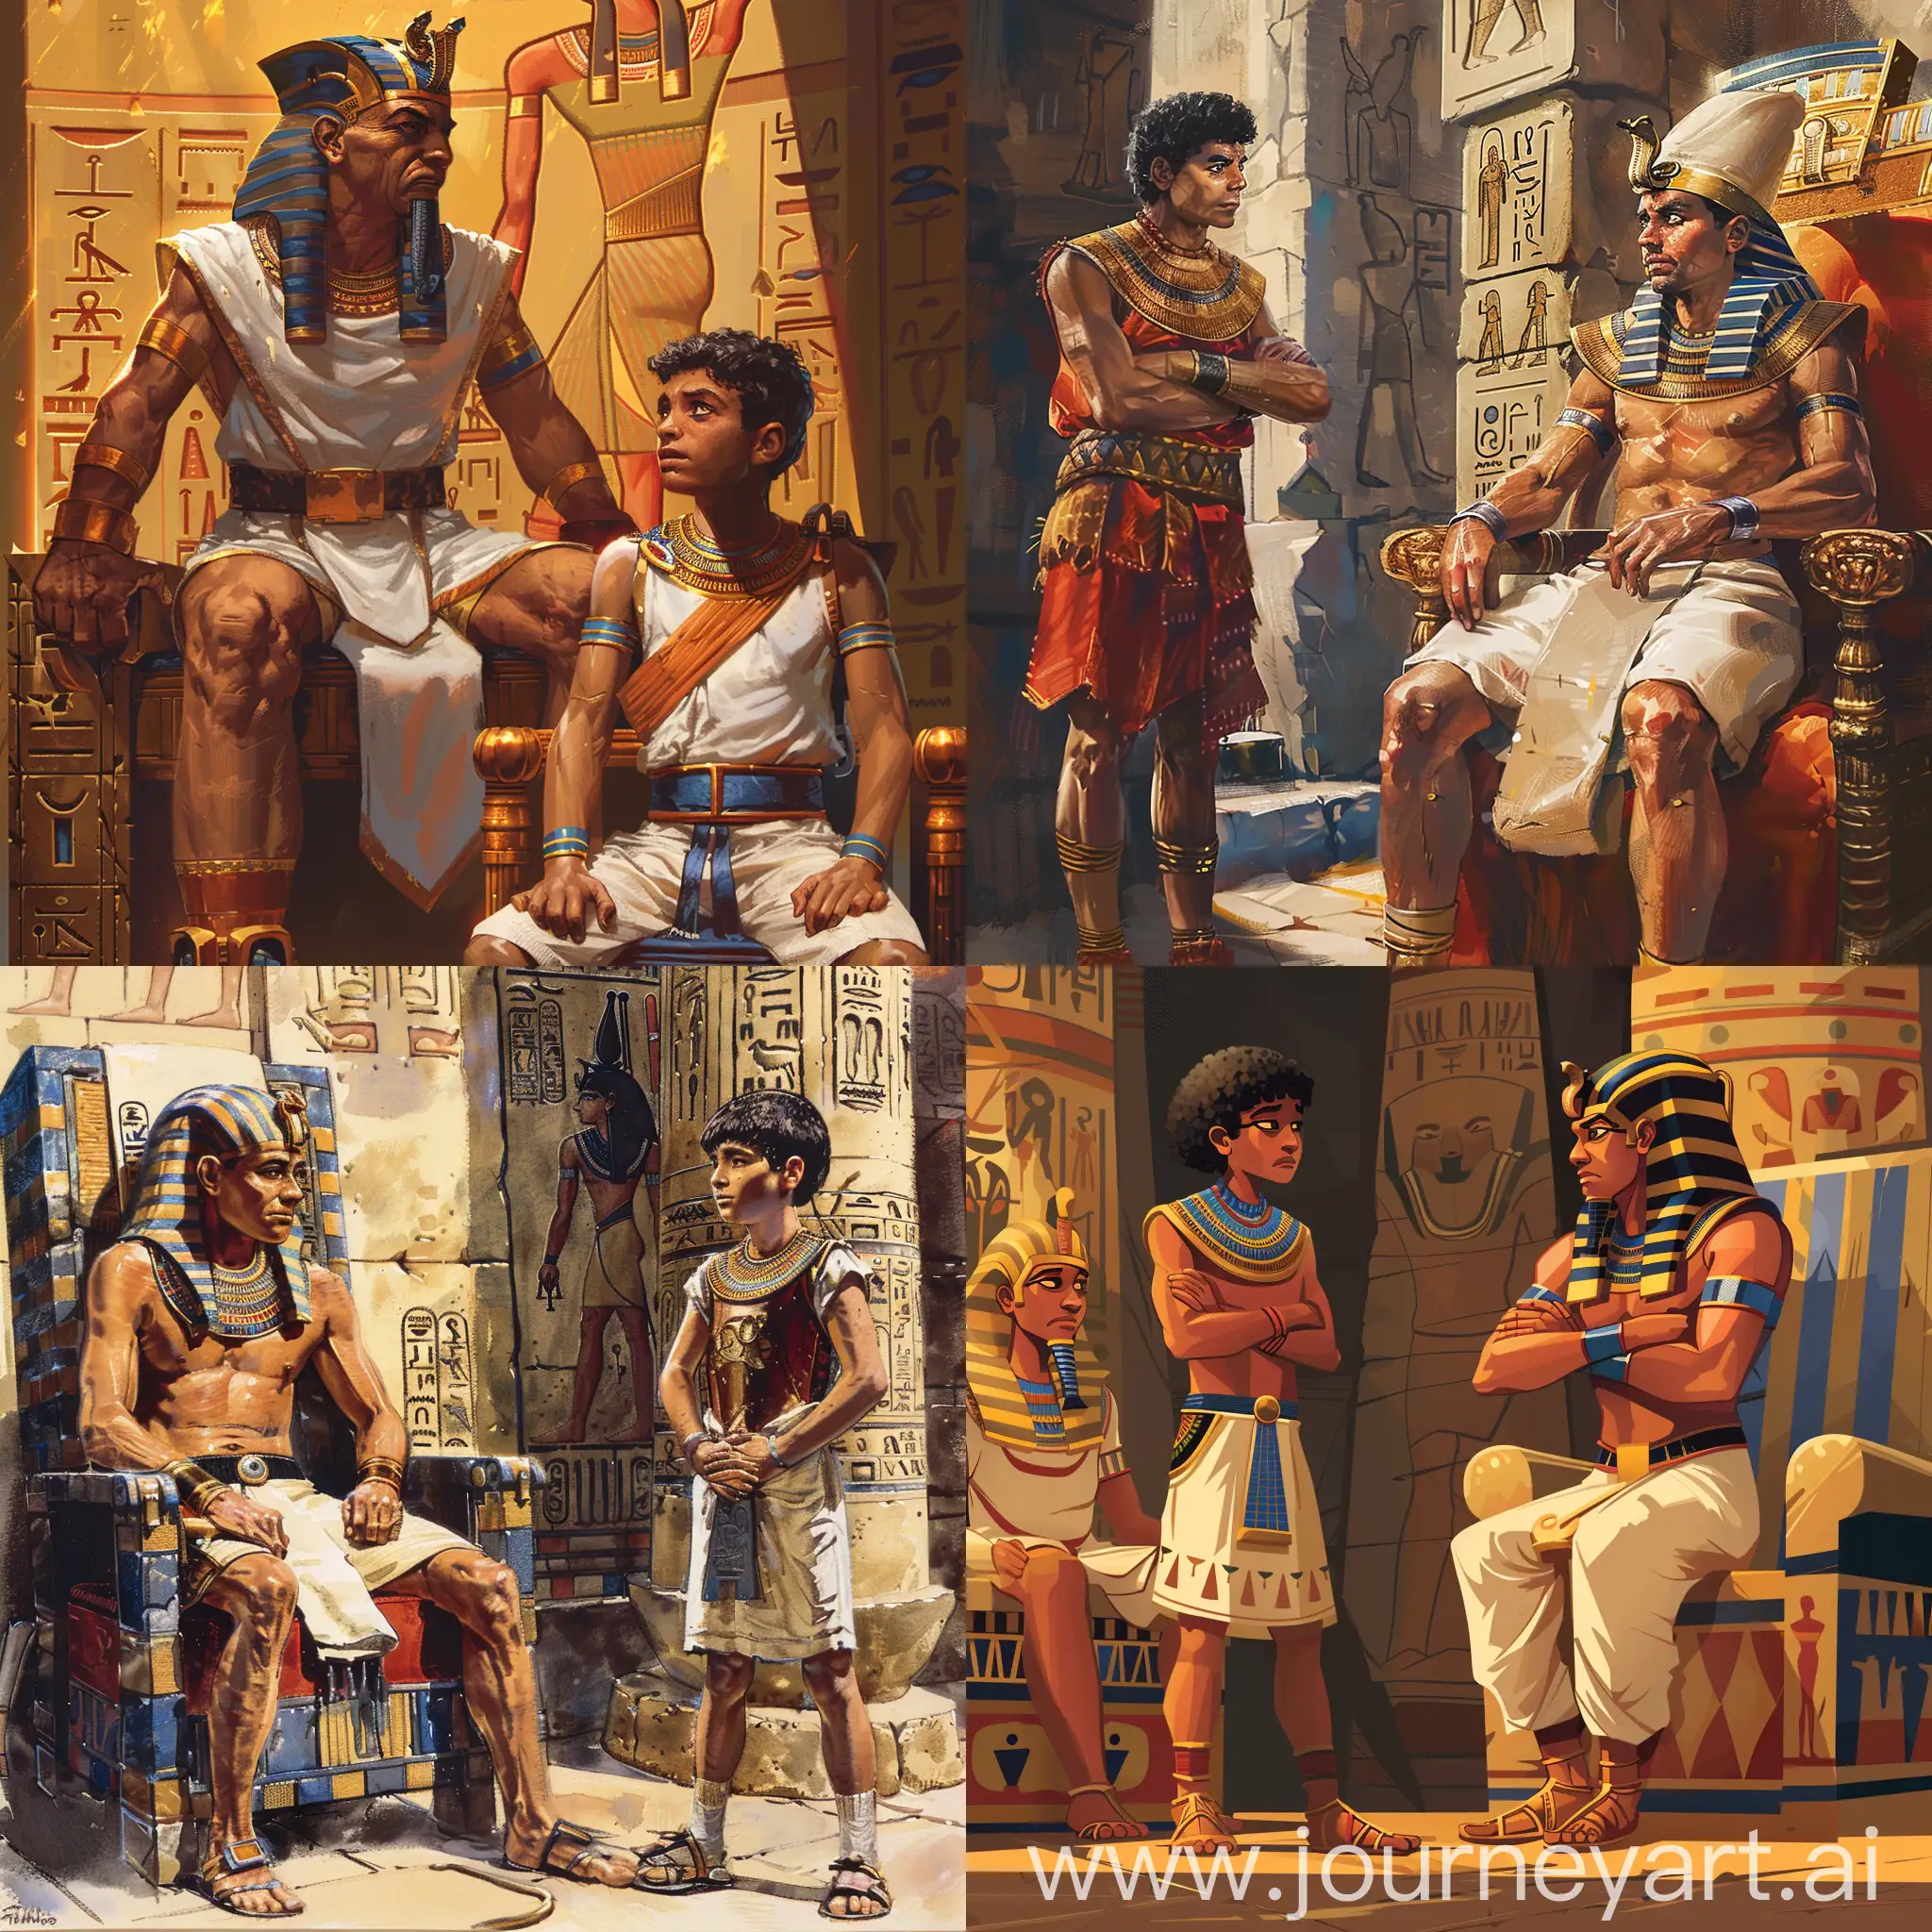 Ancient-Egyptian-Pharaoh-Confronts-Defiant-Son-in-Throne-Room